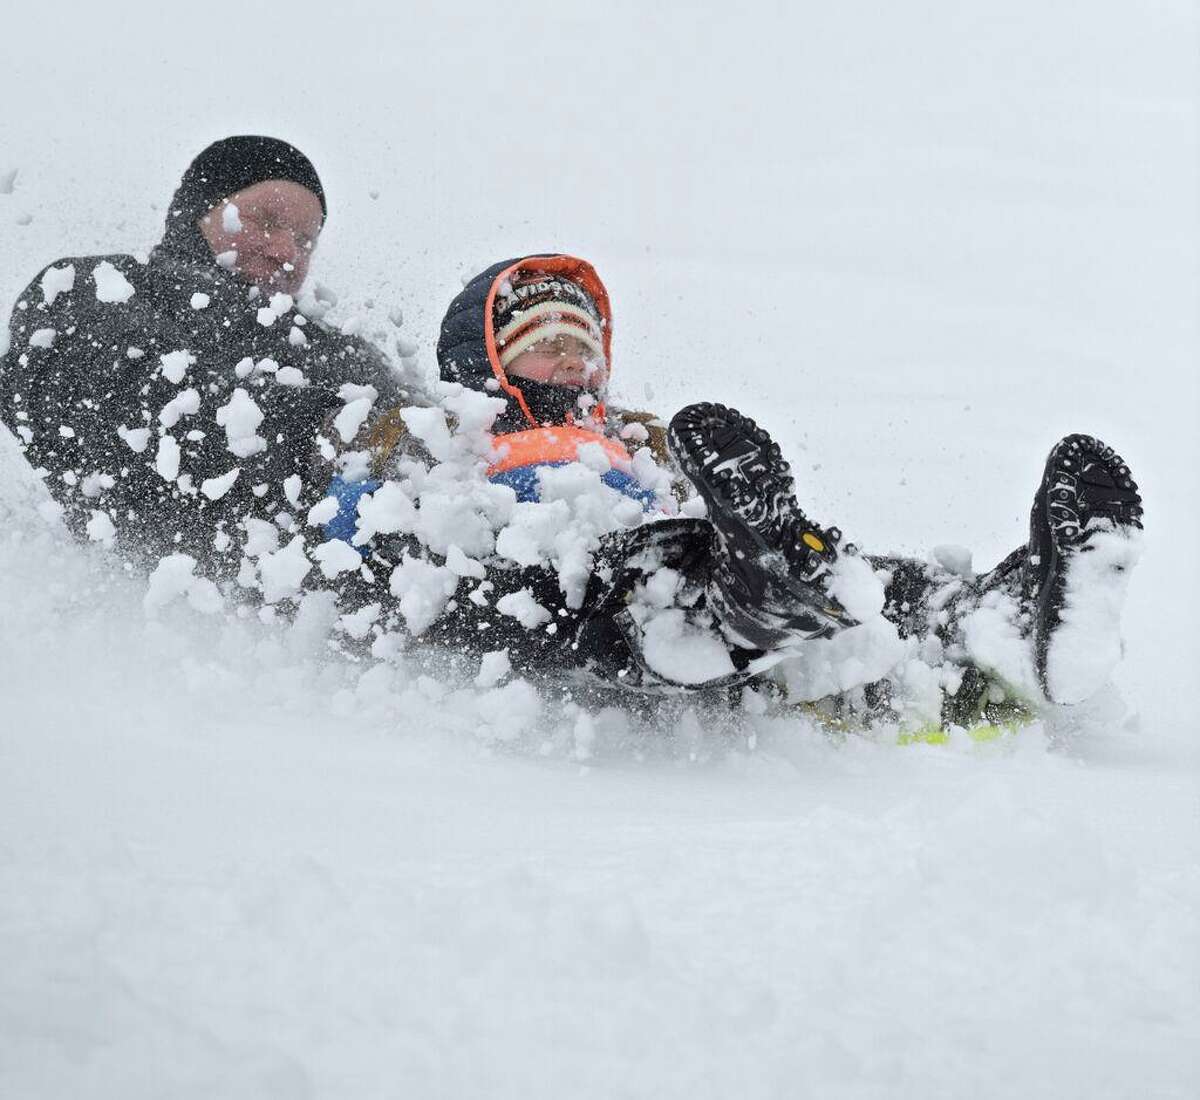 Mason Kis, of Danbury, and his father Peter get a face full of snow as they sled down a hill on the first hole of Richter Park Golf Course after another snowstorm hits greater Danbury, Conn. Tuesday, March 13, 2018.